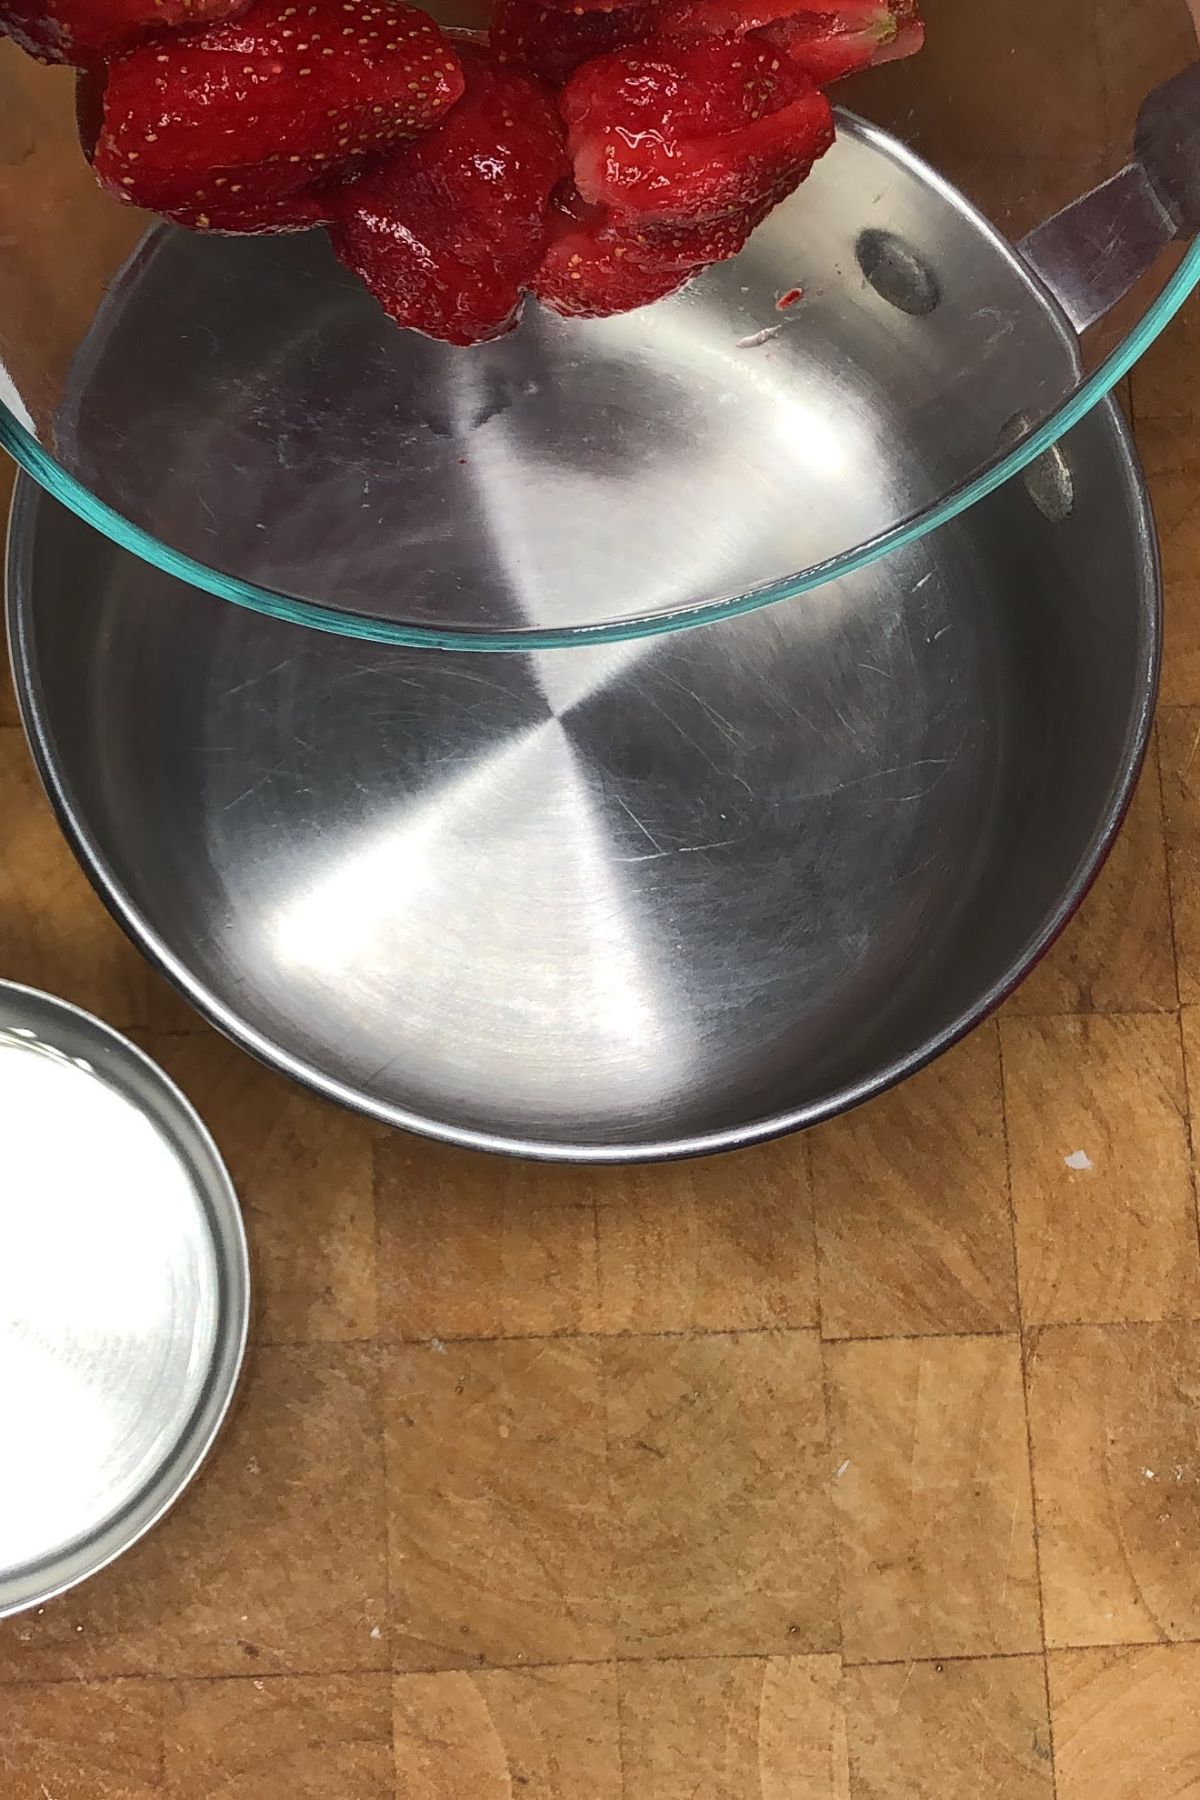 Pouring strawberries into a pot.